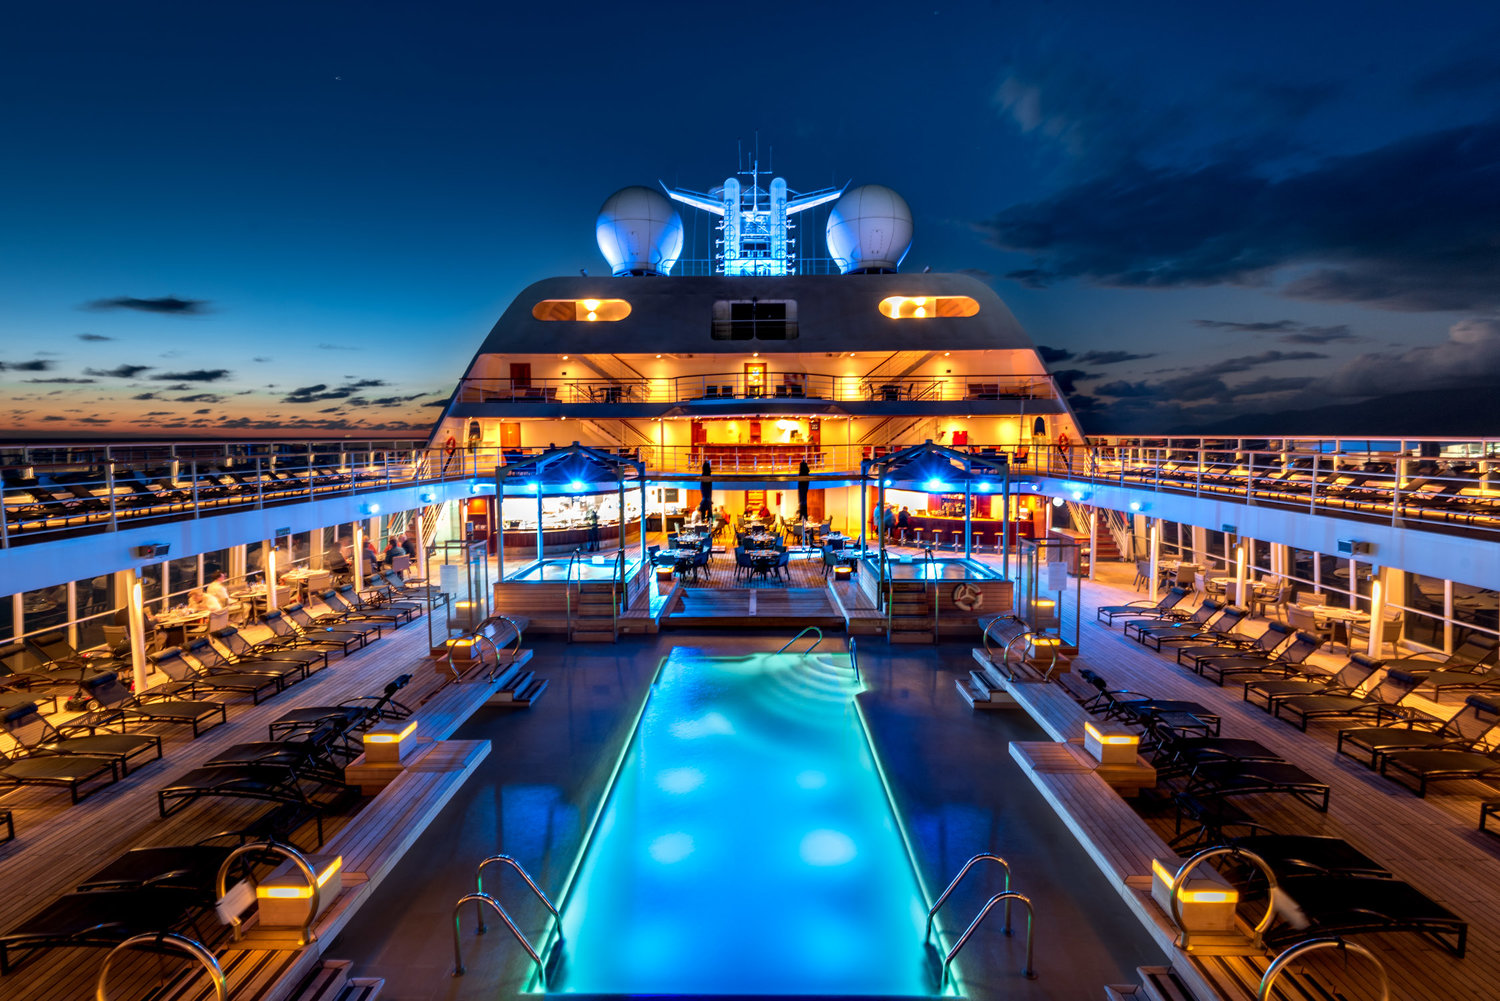 Cruise Parties help in Growing the Business Opportunities